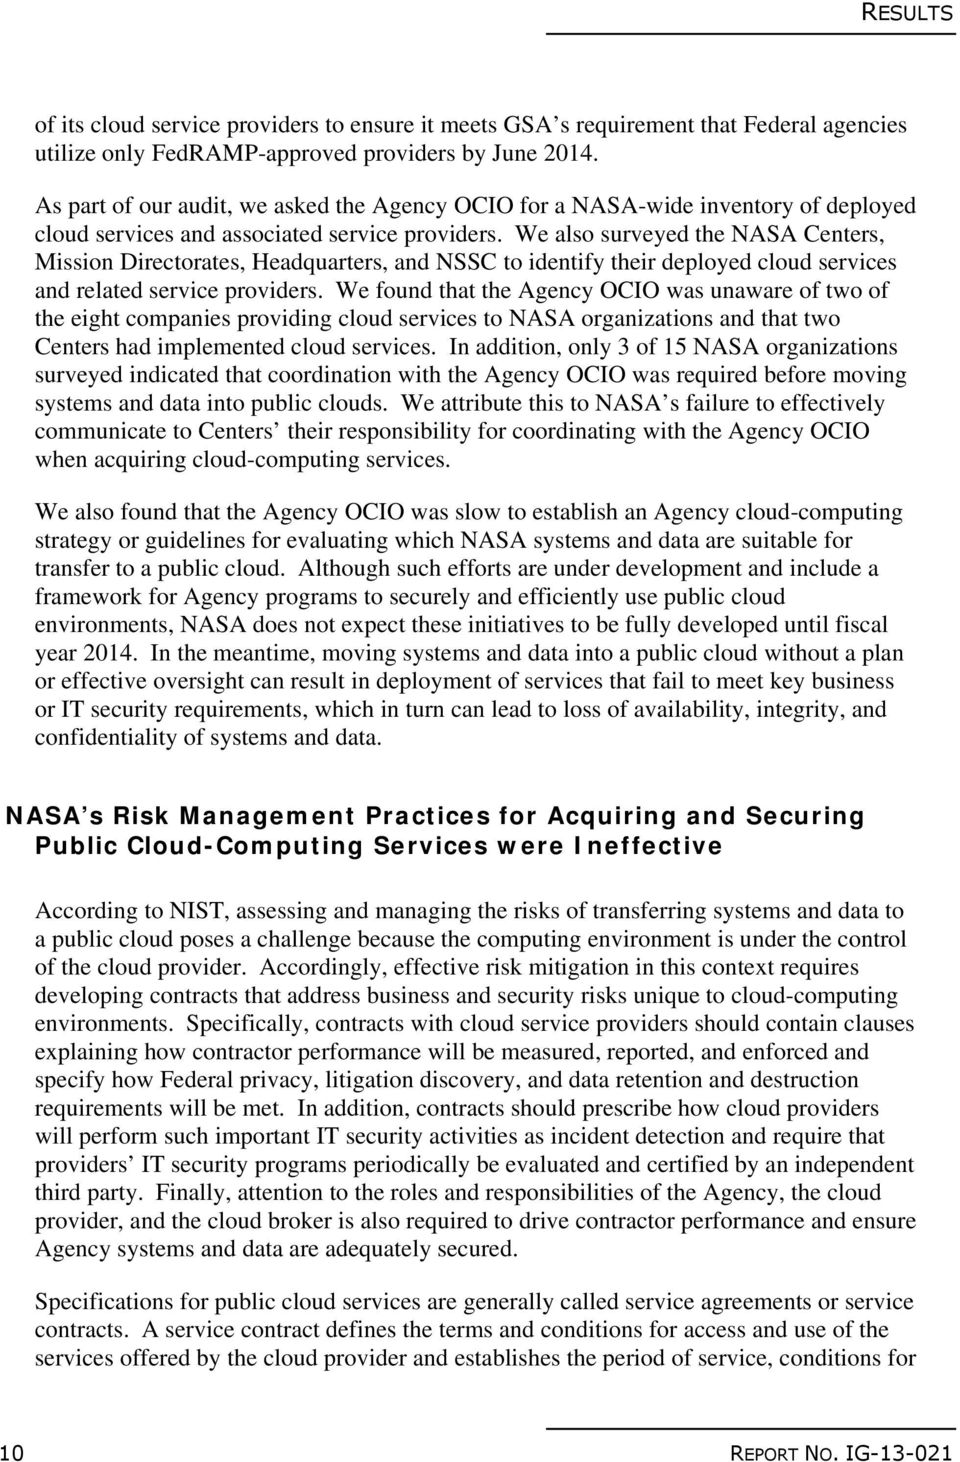 We also surveyed the NASA Centers, Mission Directorates, Headquarters, and NSSC to identify their deployed cloud services and related service providers.